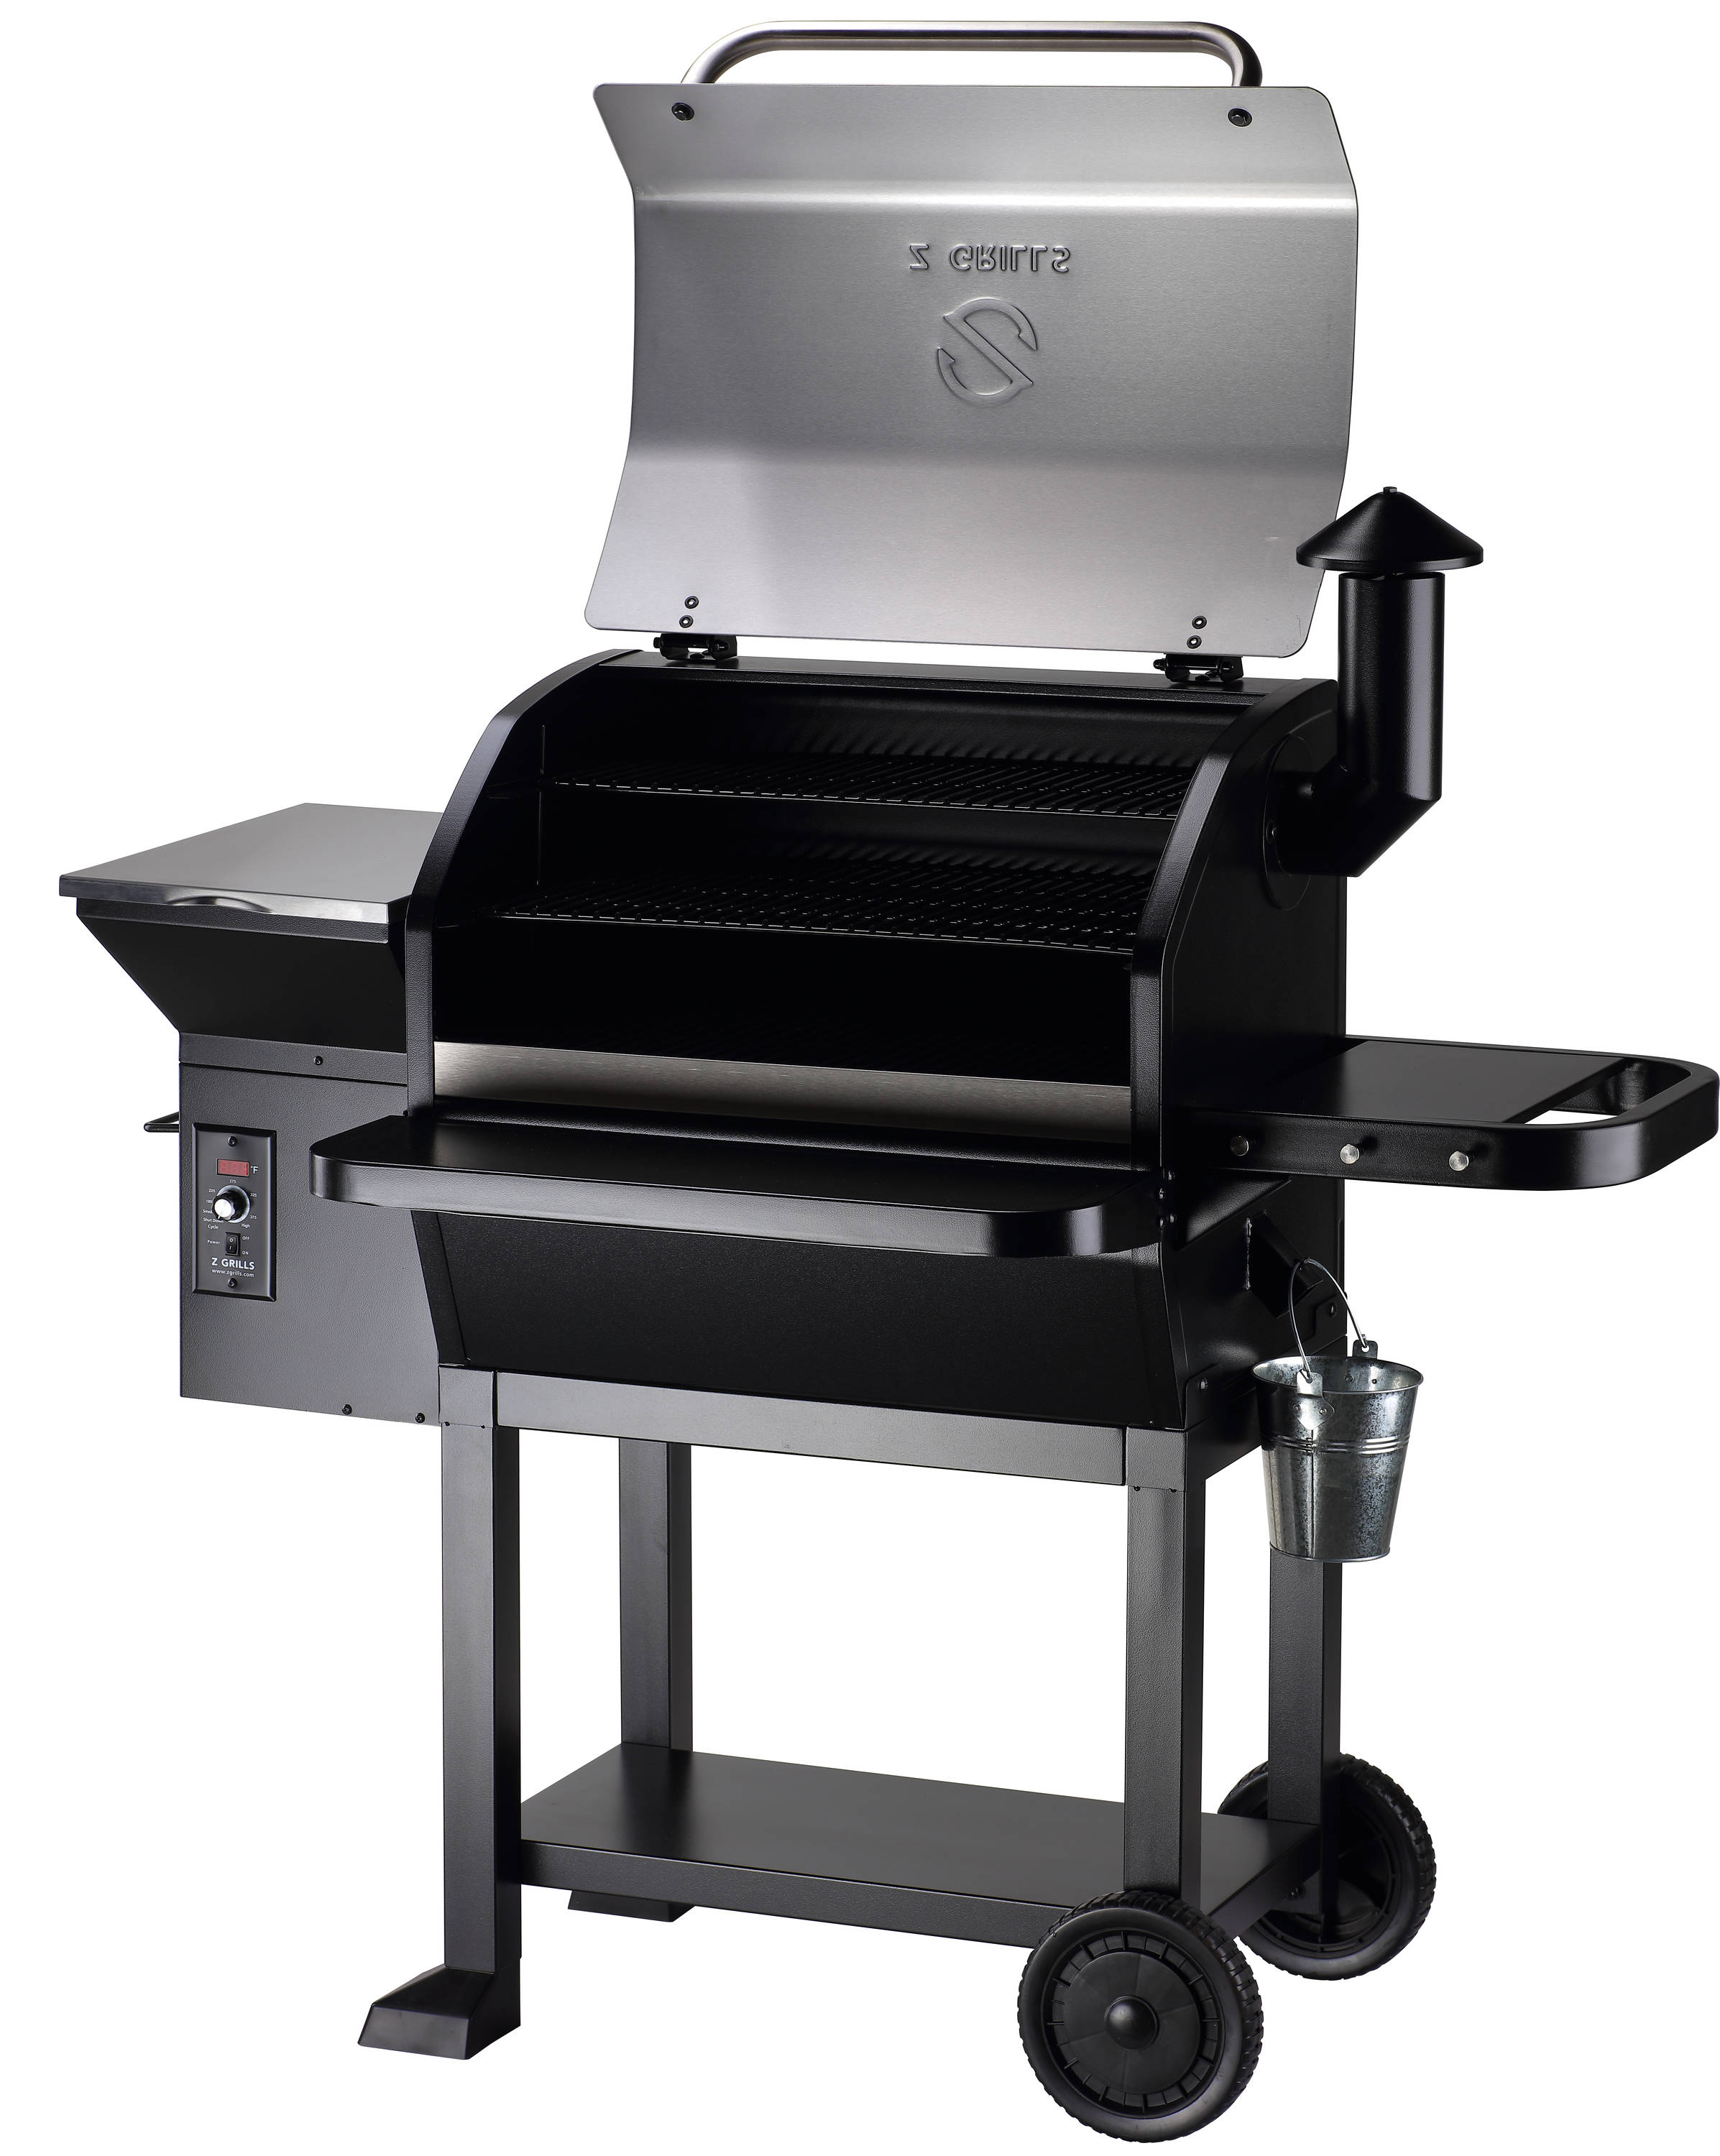 Z GRILLS 10002B2E 1060-Sq in Stainless Steel Pellet Grill in the